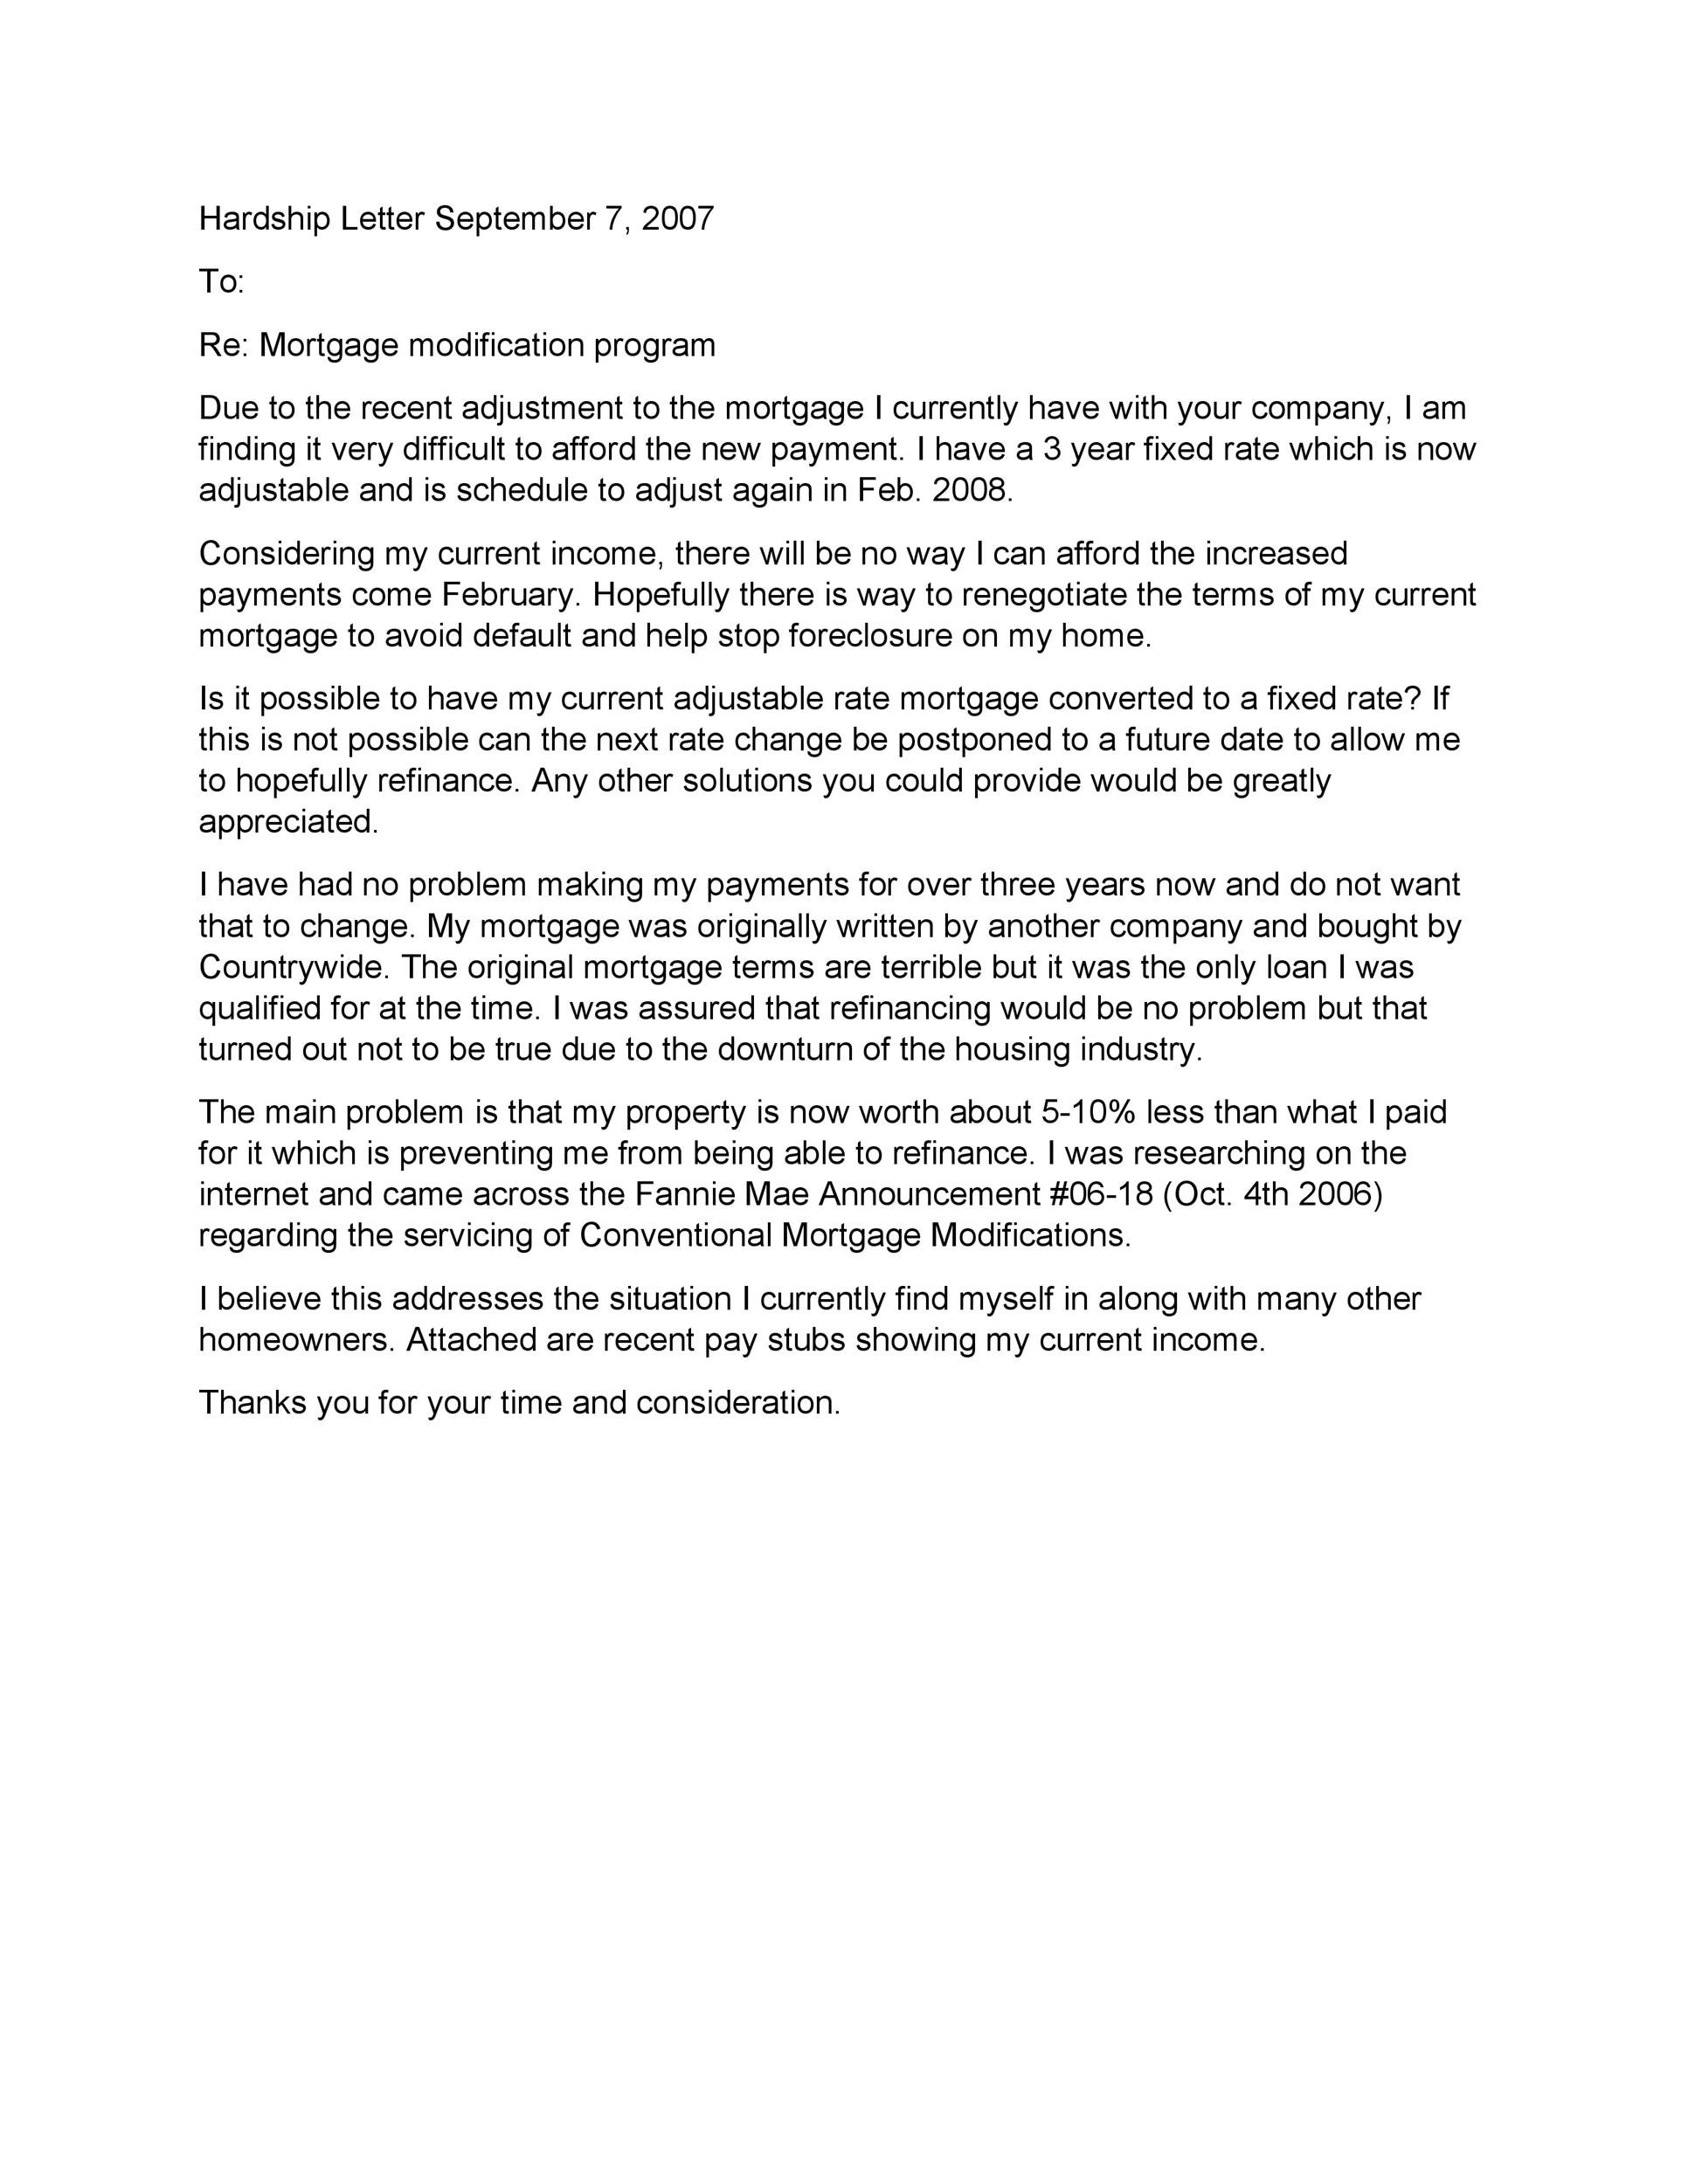 Letter Of Explanation To Mortgage Underwriters from templatelab.com